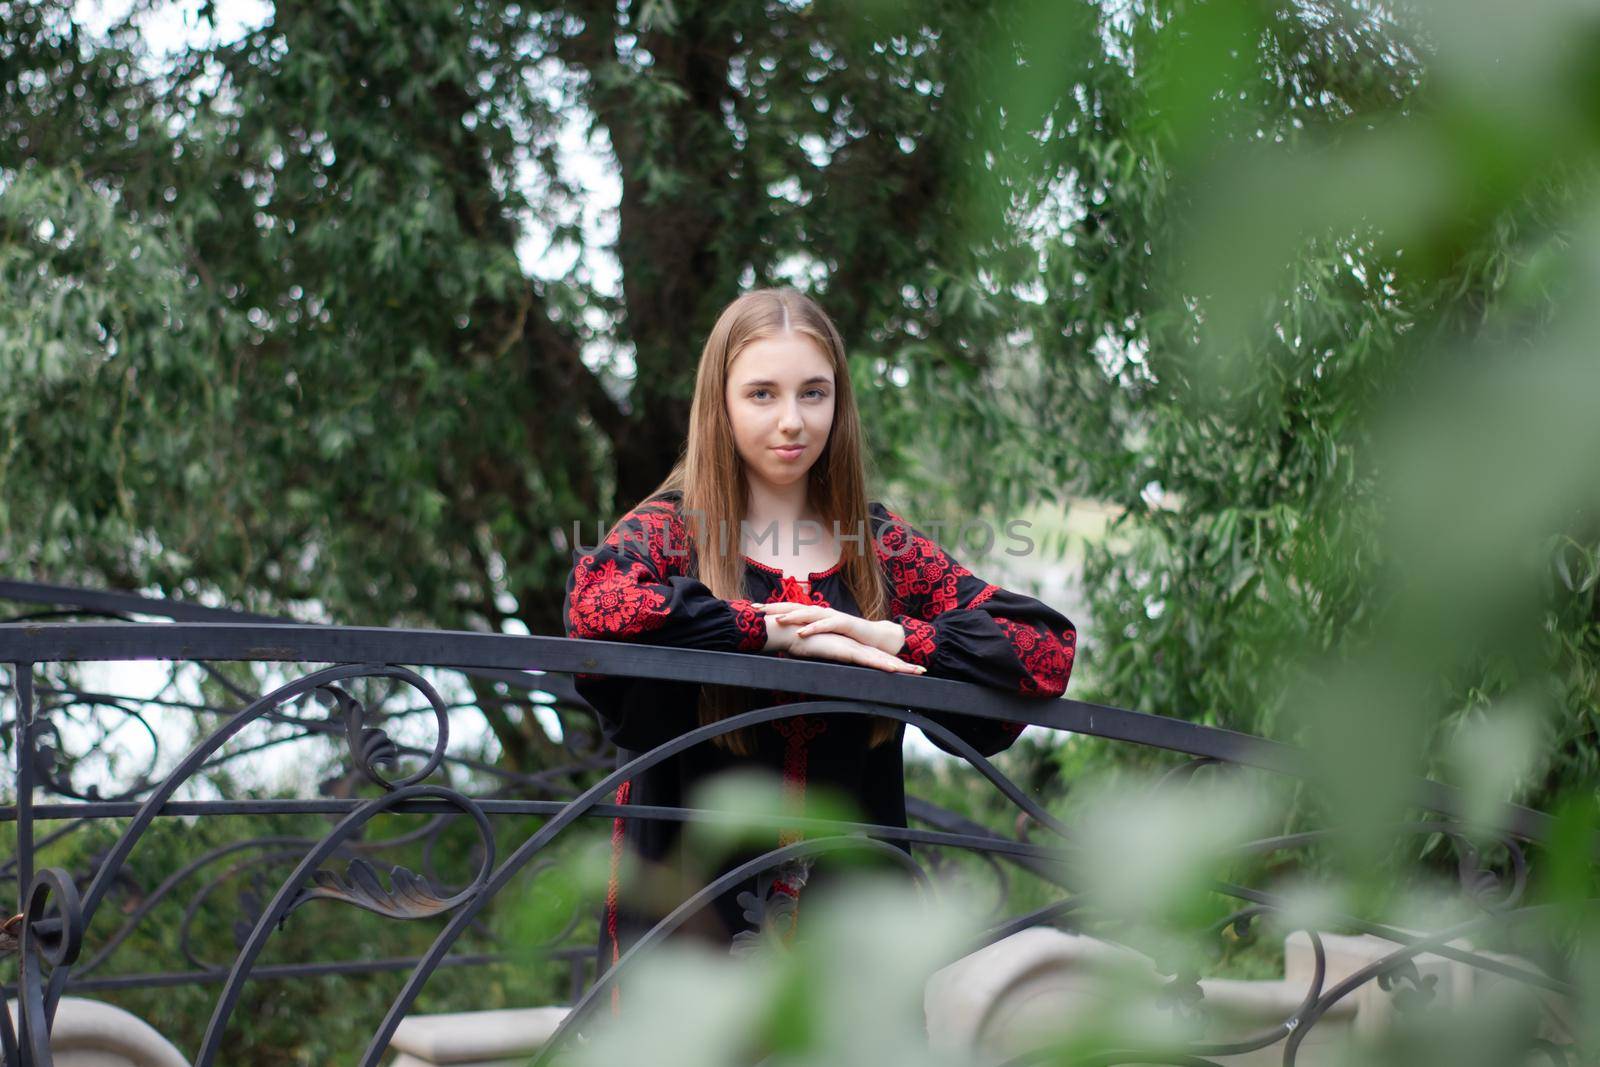 charming ukrainian young woman in embroidered national red and black dress outdoors. pretty girl in park wearing vyshyvanka.